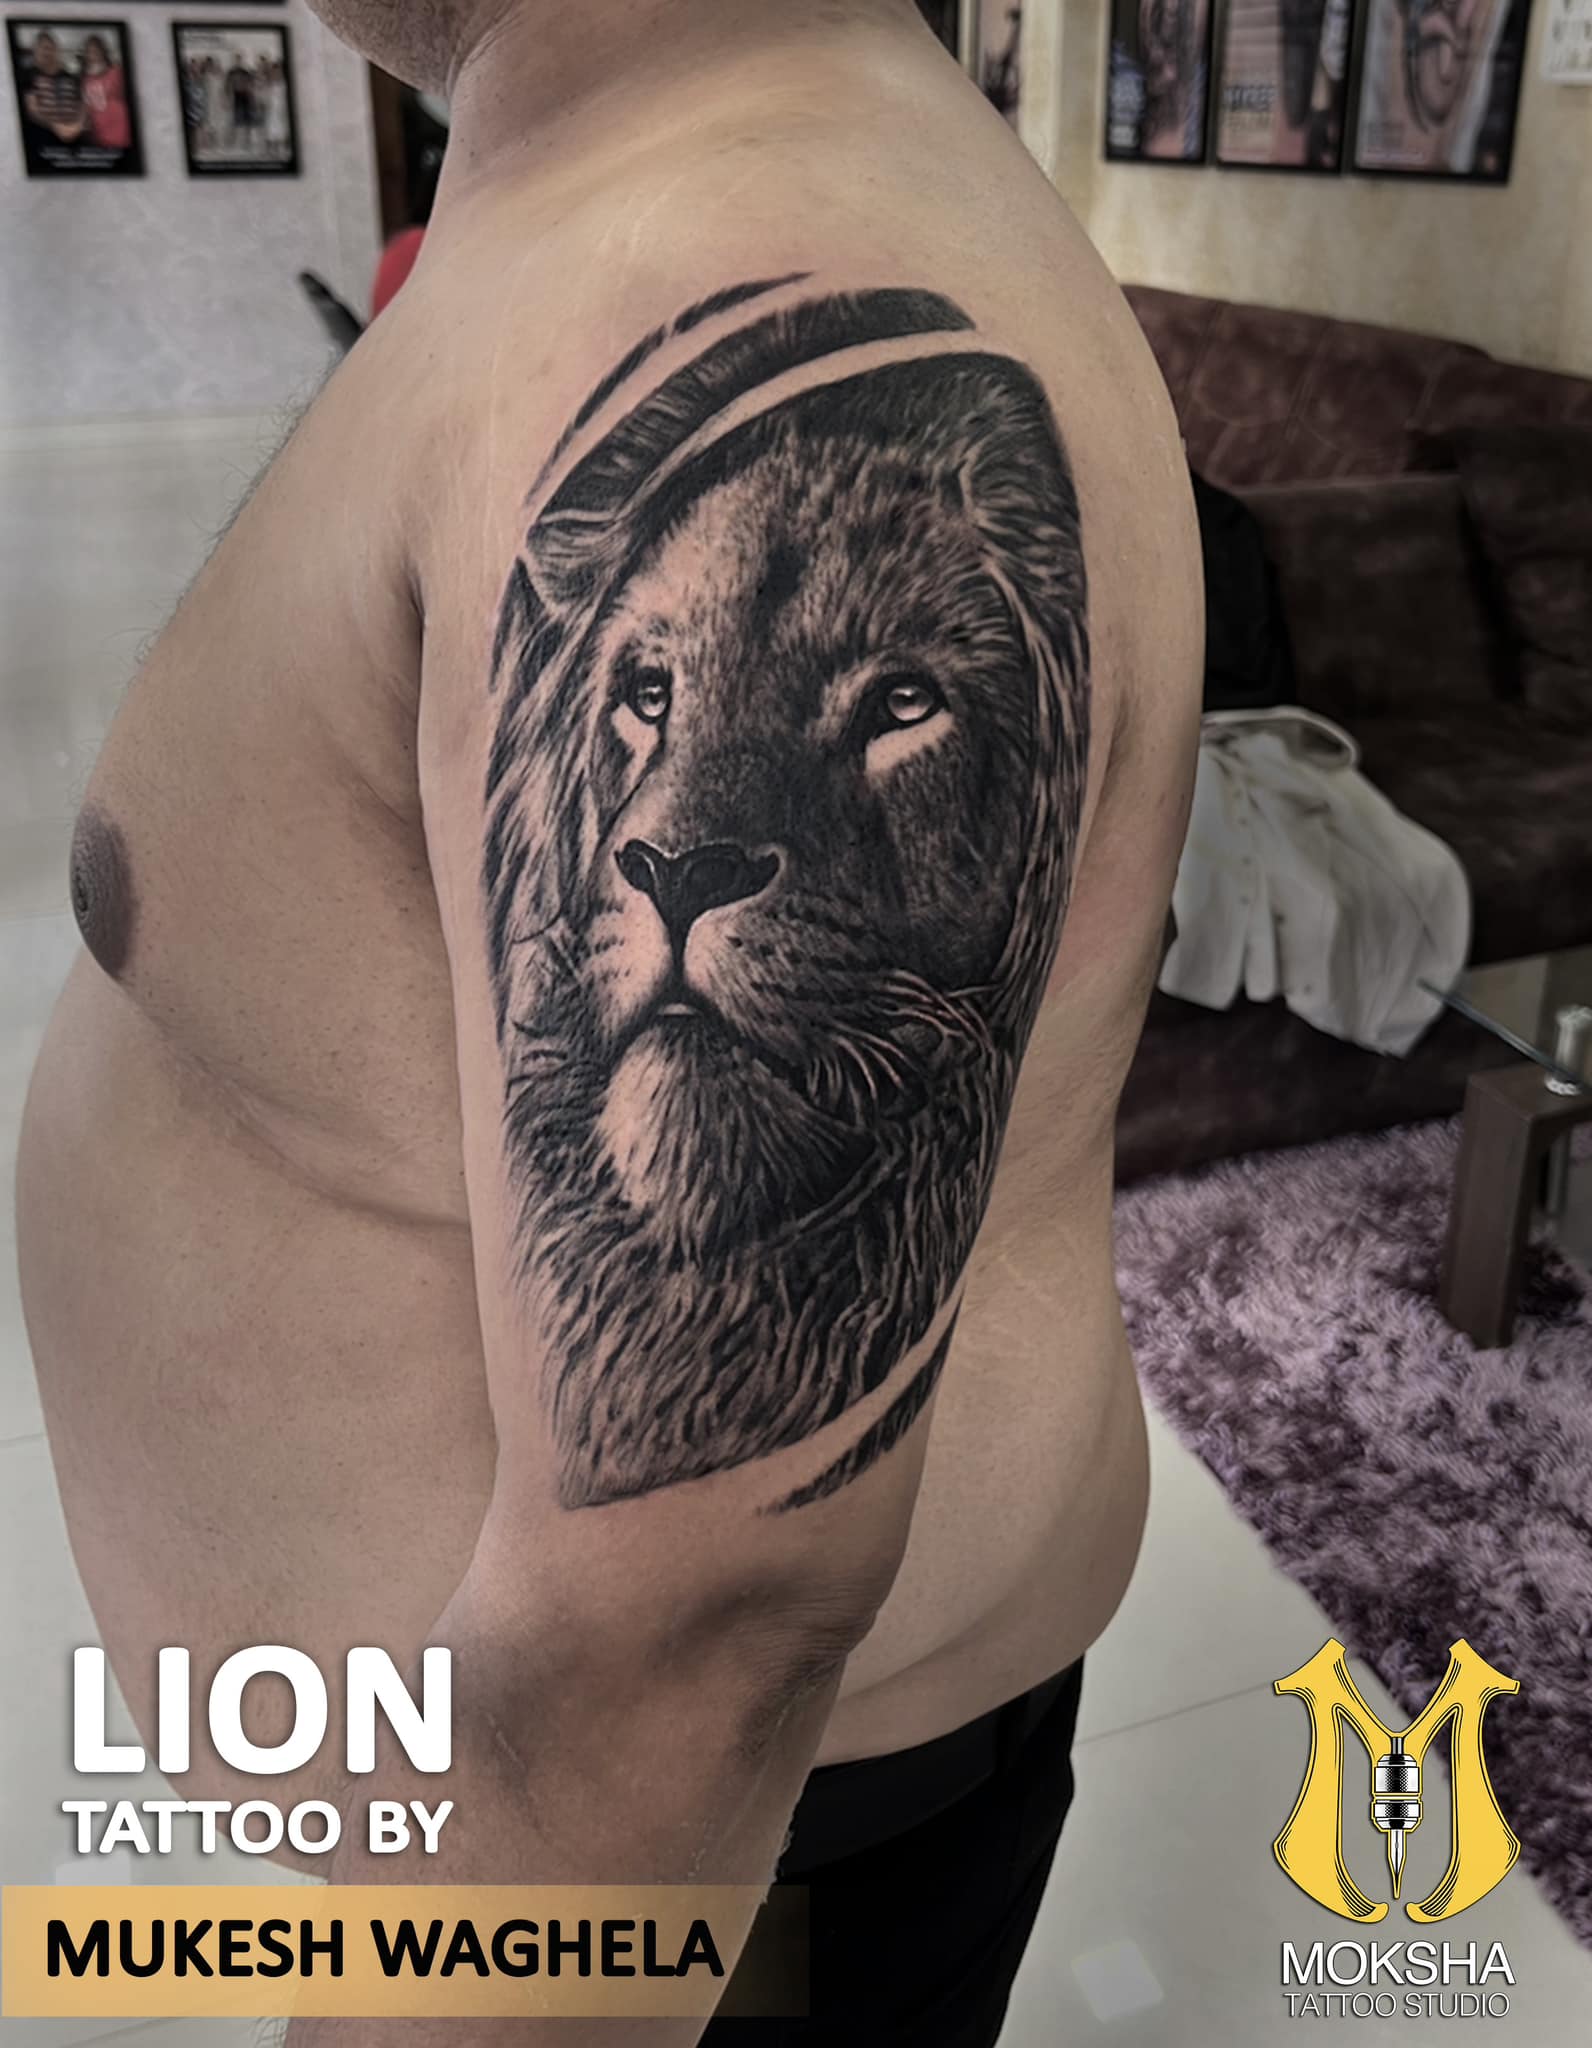 Discover the Best Tattoo Artist in Goa for Lion Tattoos and Personalized Ink - Mukesh Waghela at Moksha Tattoo Studio